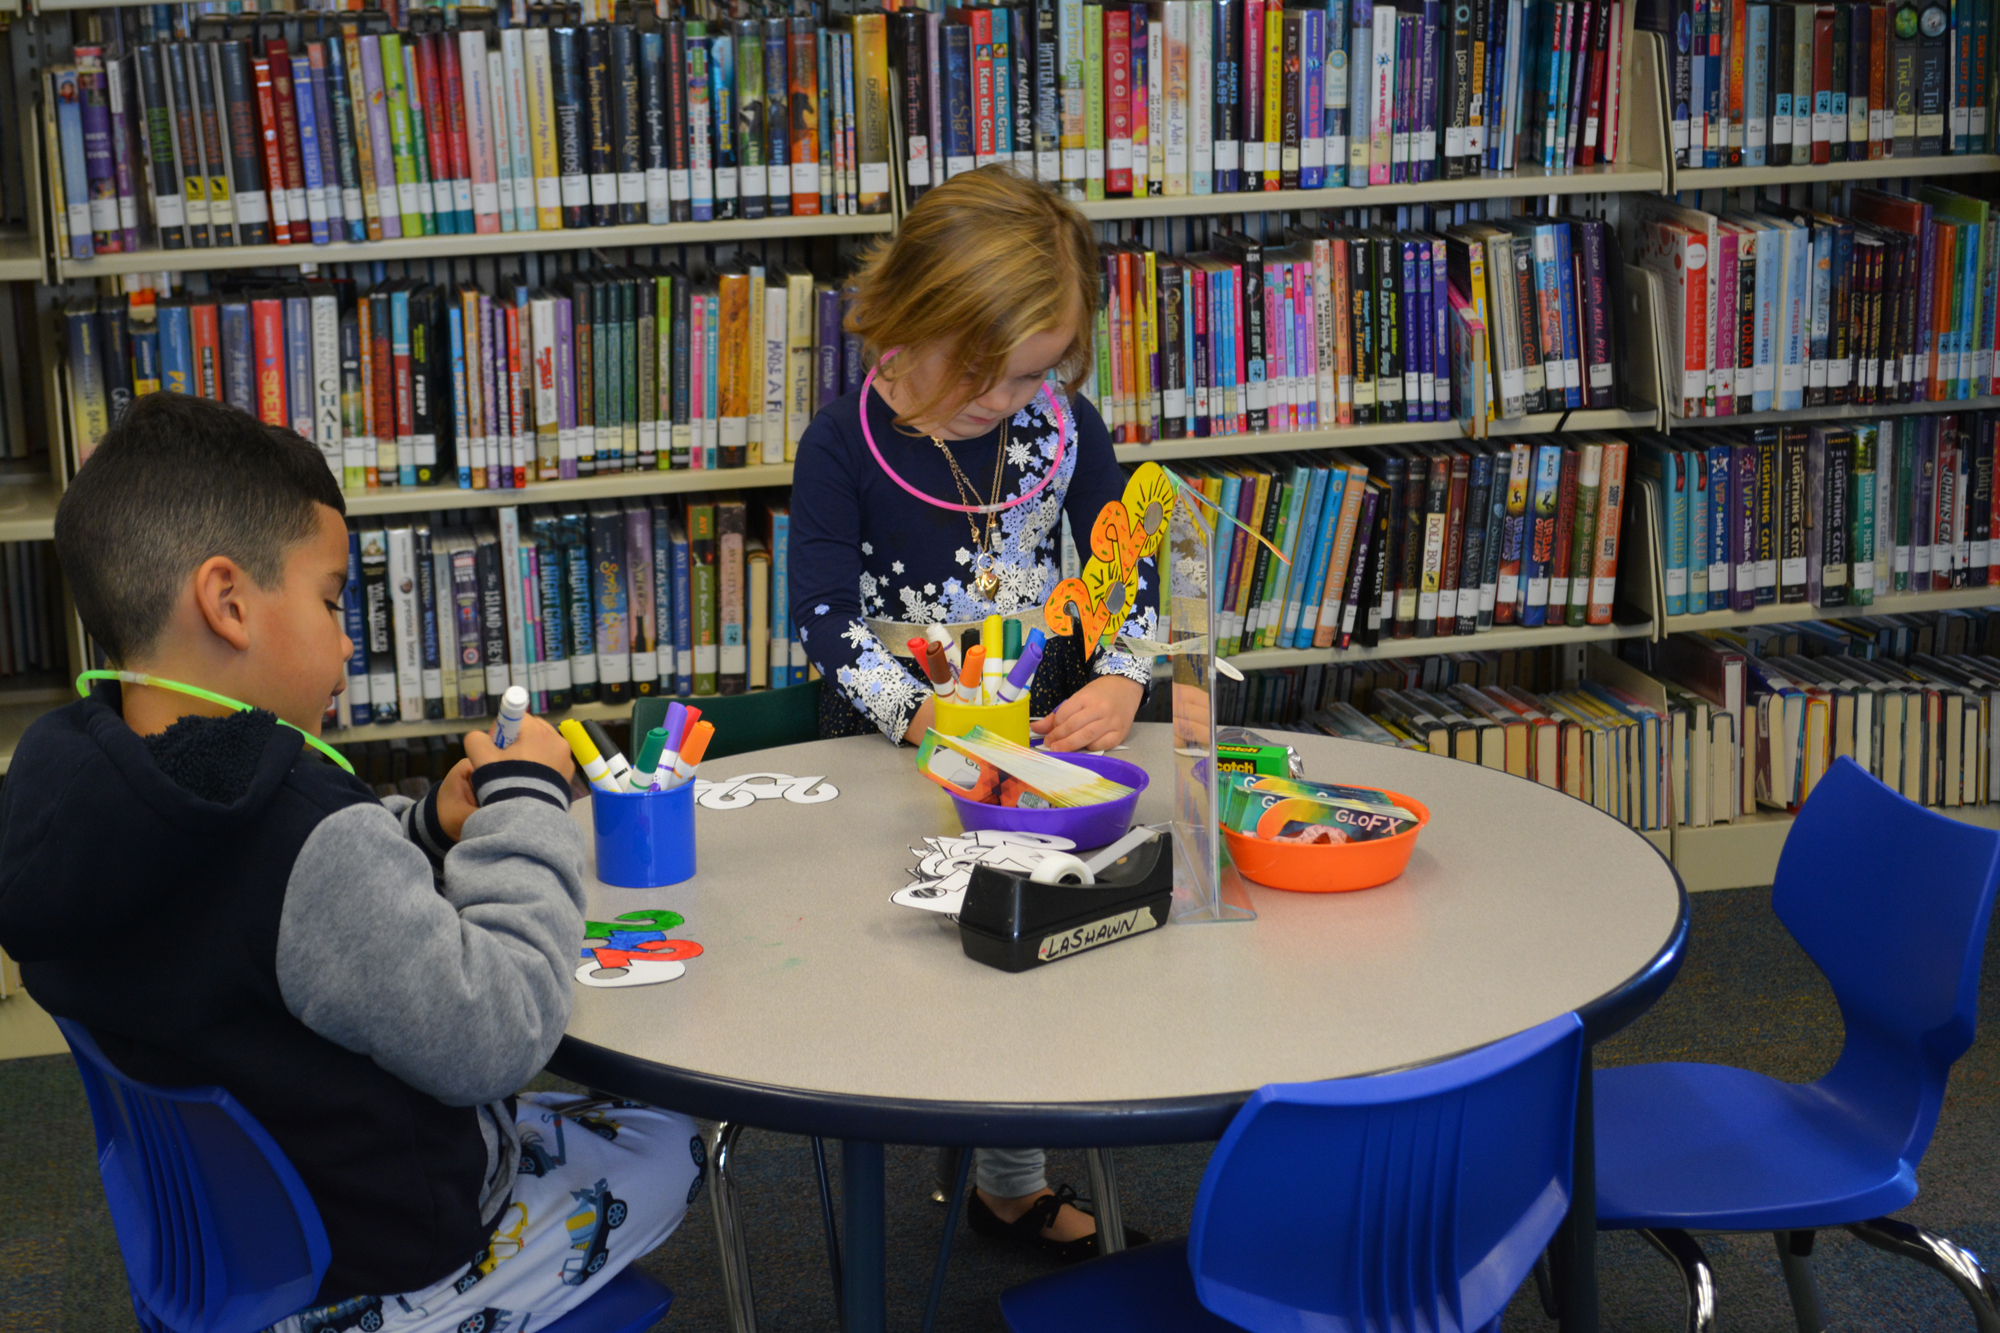 Kids engaged in an activity at an in-library children's program